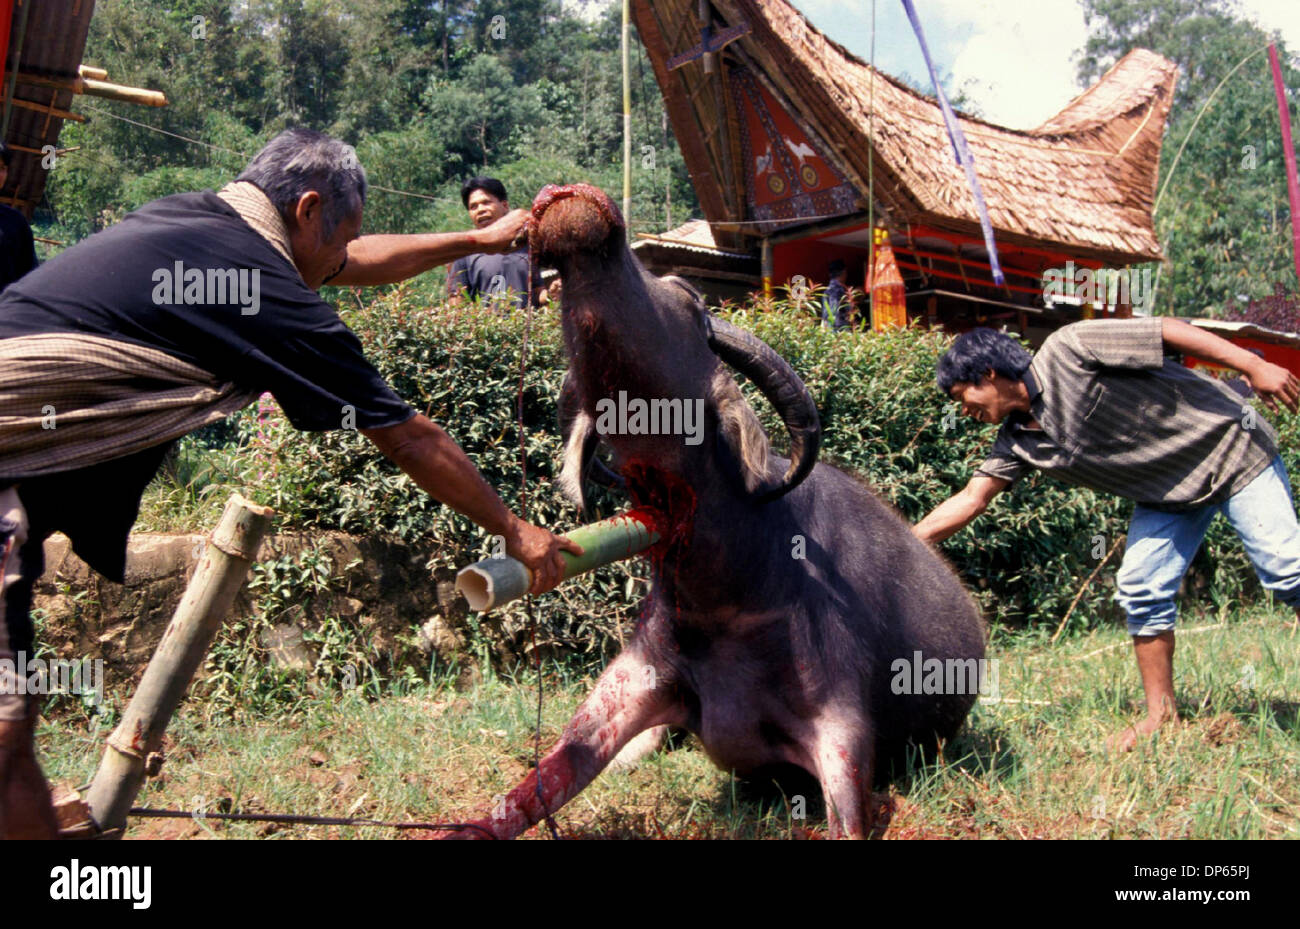 Oct 09, 2006; Toraja, South Sulawesi, INDONESIA; A buffalo is sacrificed during Torajan funeral rites. The funeral is the most important of all Torajan ceremonies as it concerns with sending a dead person to the afterworld.  Without proper funeral rites, the spirit of the deceased will cause misfortune to its family. Mandatory Credit: Photo by Edy Purnomo/JiwaFoto/ZUMA Press. (©) C Stock Photo